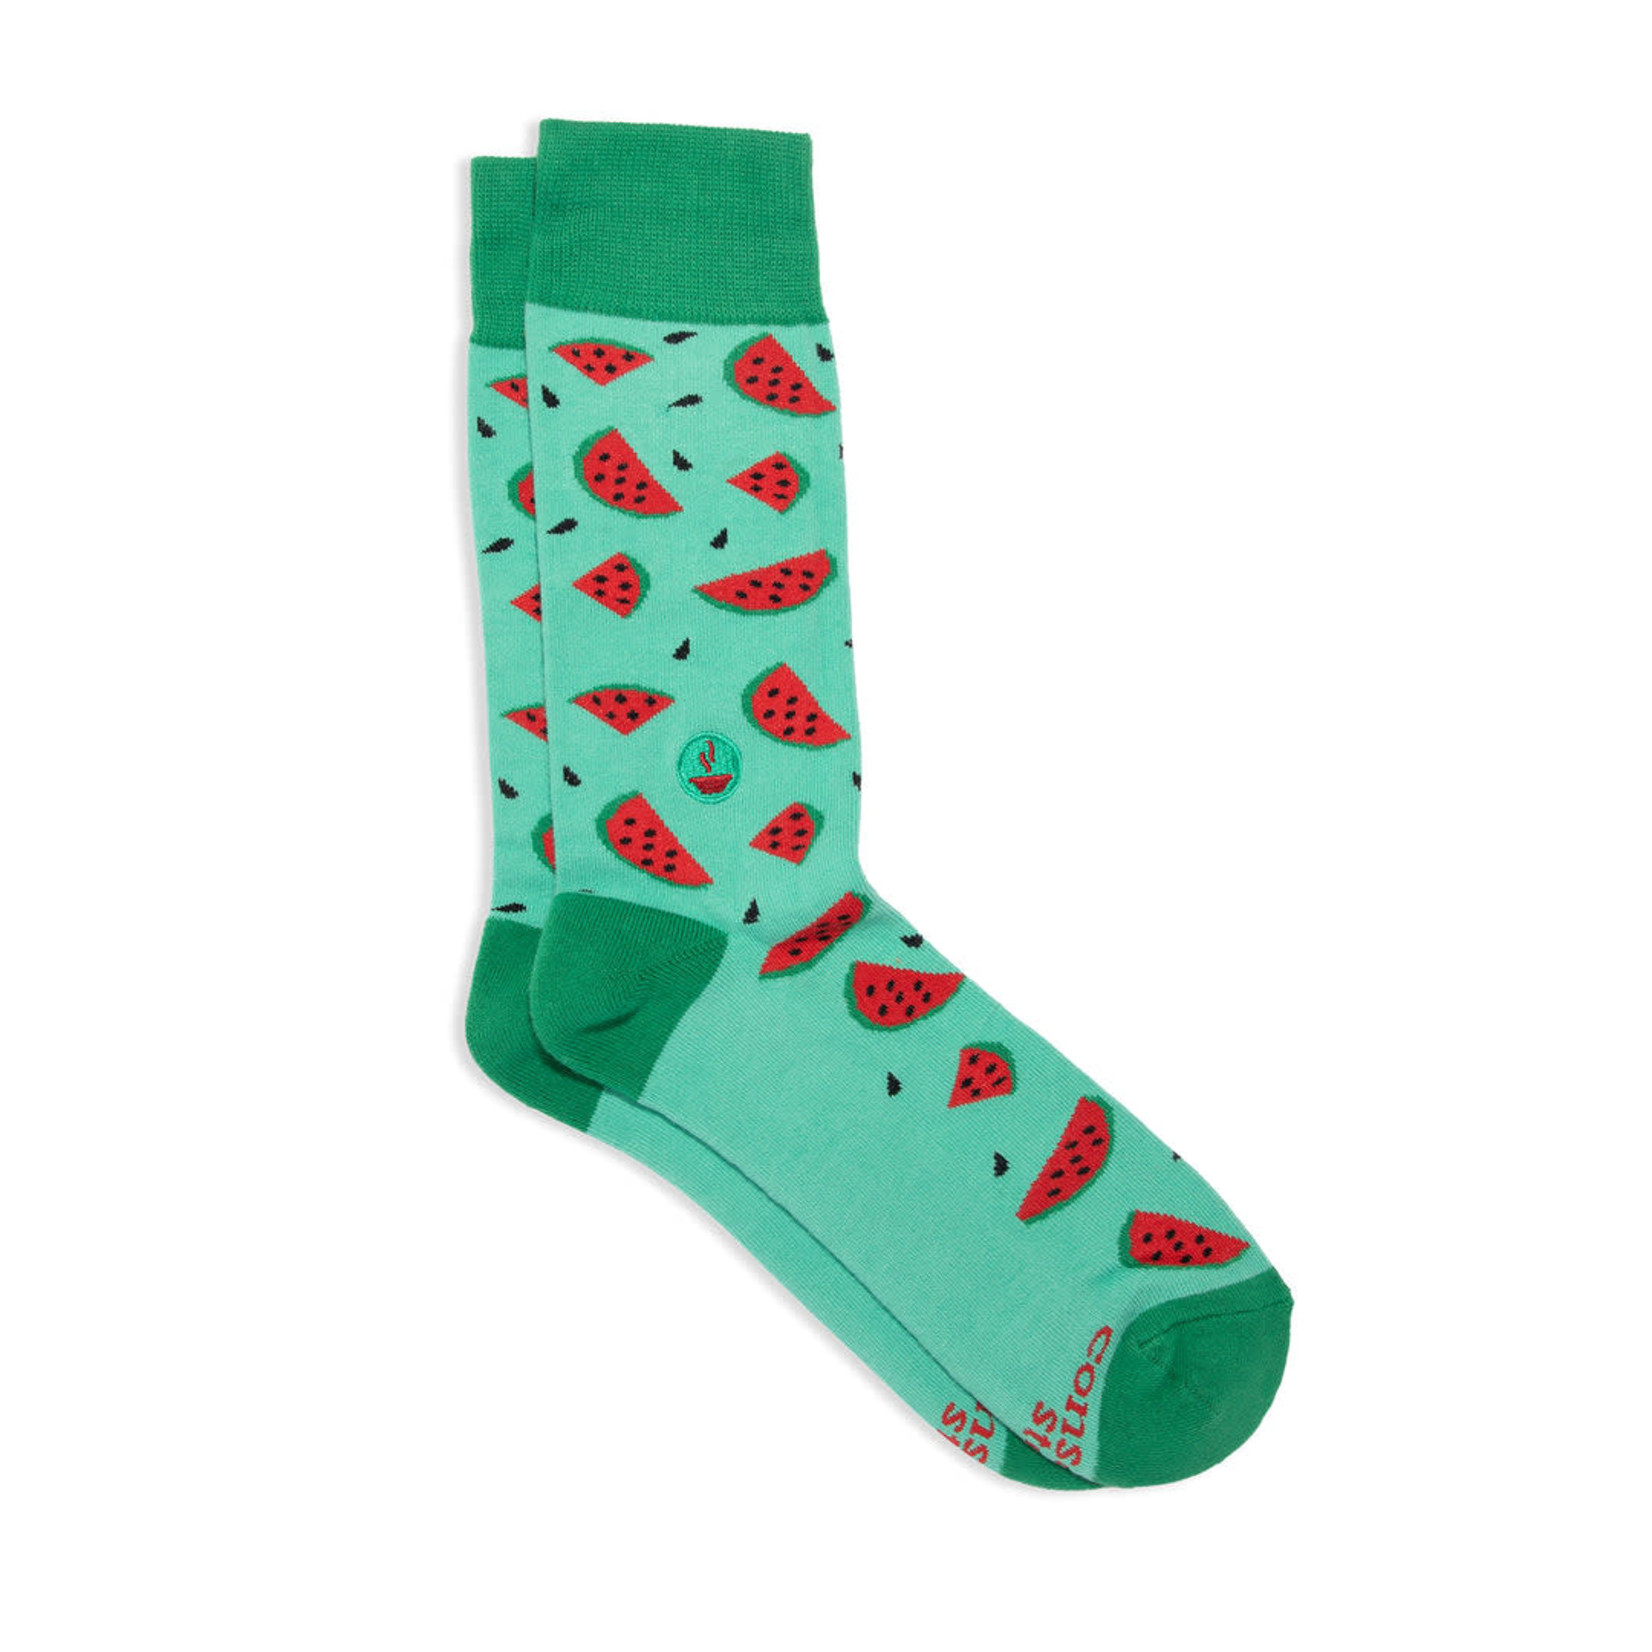 Conscious Step Conscious Step Socks that Provide Meals, Watermelon, Small